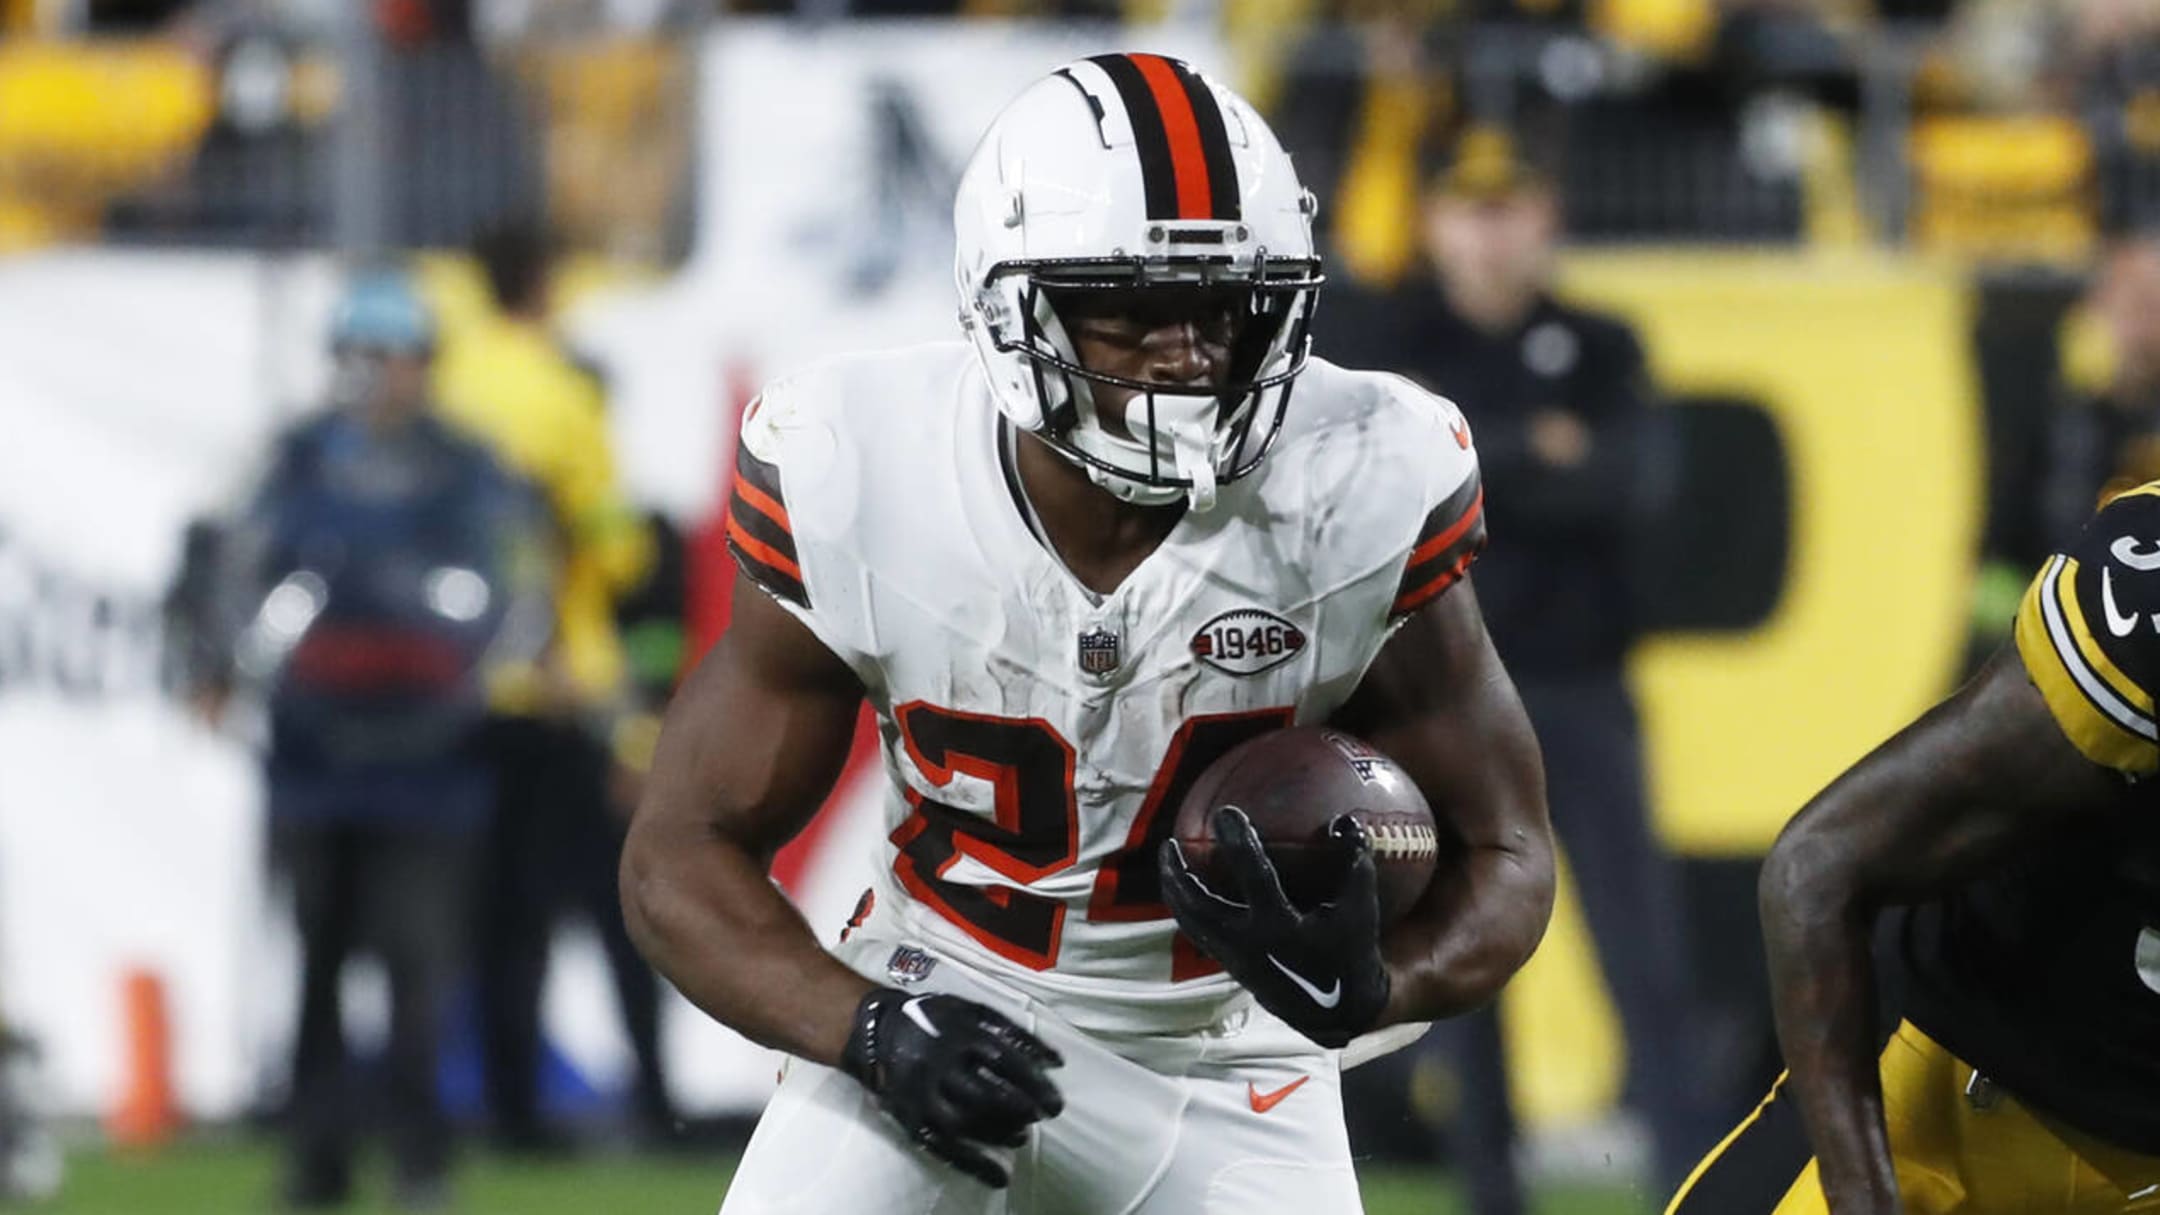 ESPN explains decision not to show replay of Chubb's injury